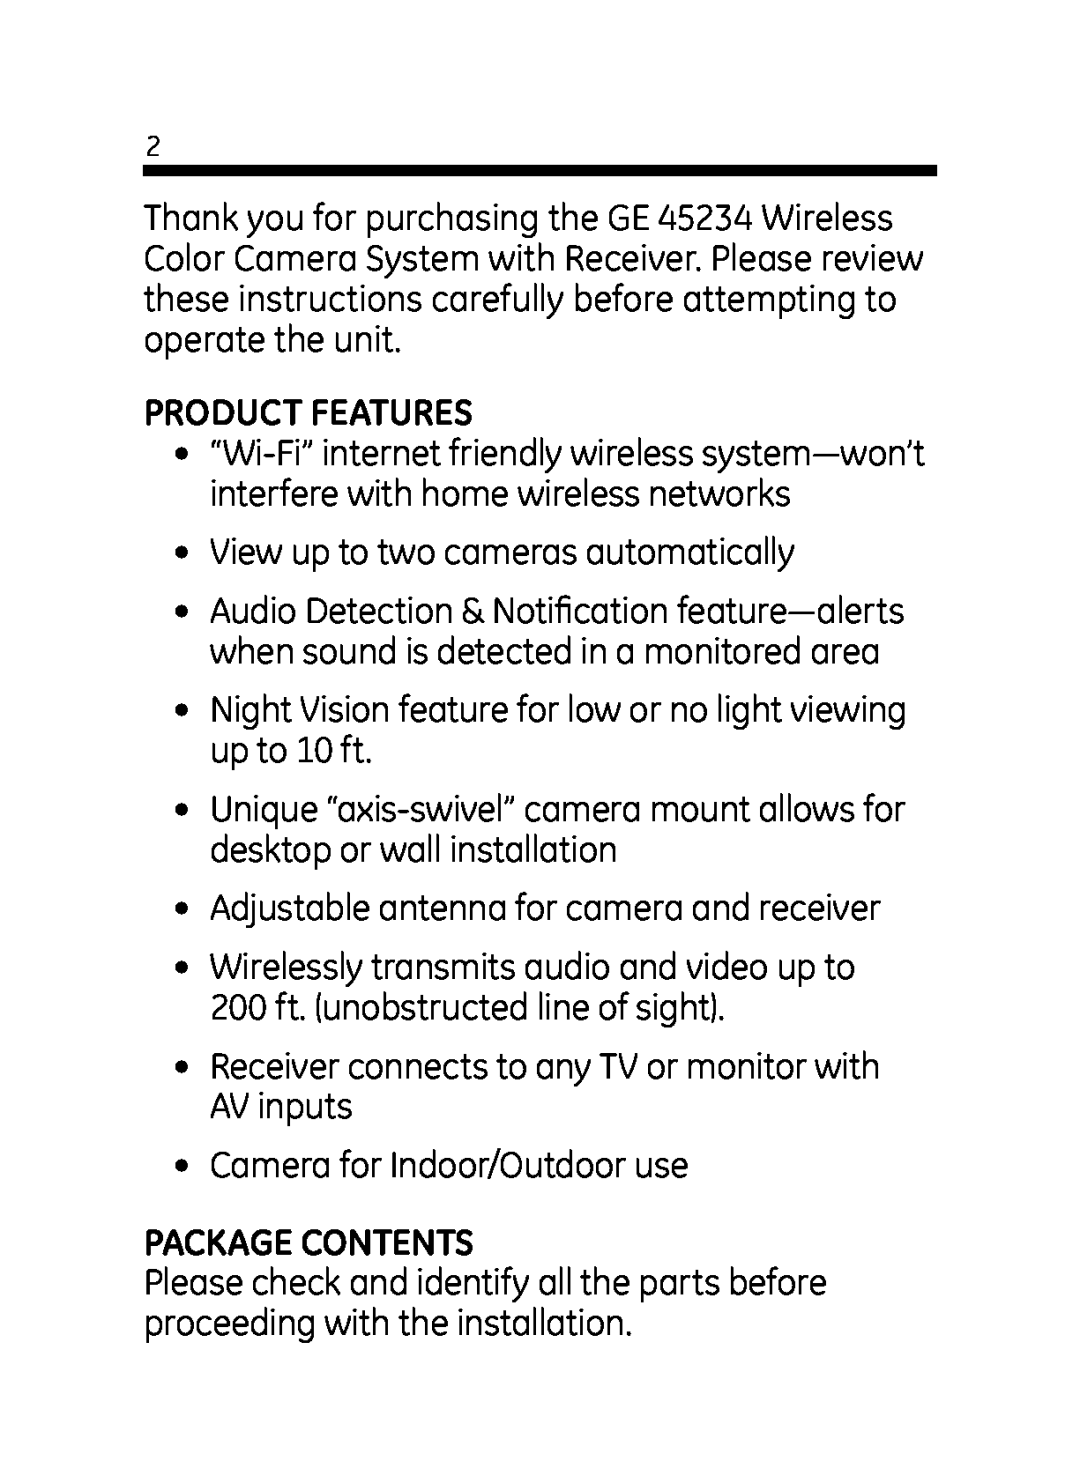 Jasco 45234 user manual Product Features, Package Contents 